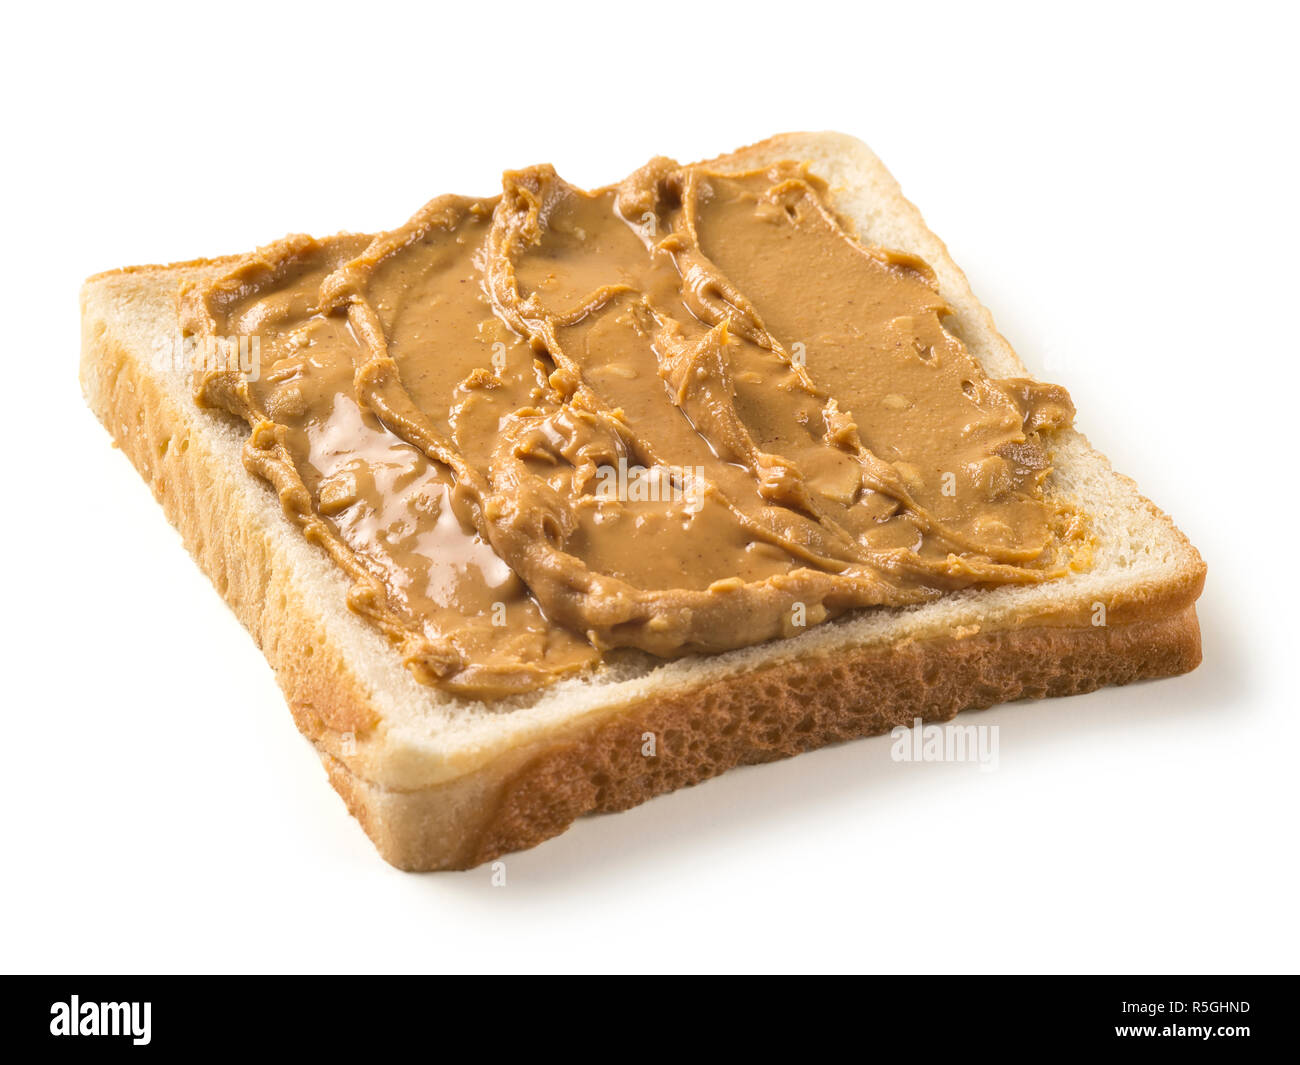 White bread with peanut butter Stock Photo